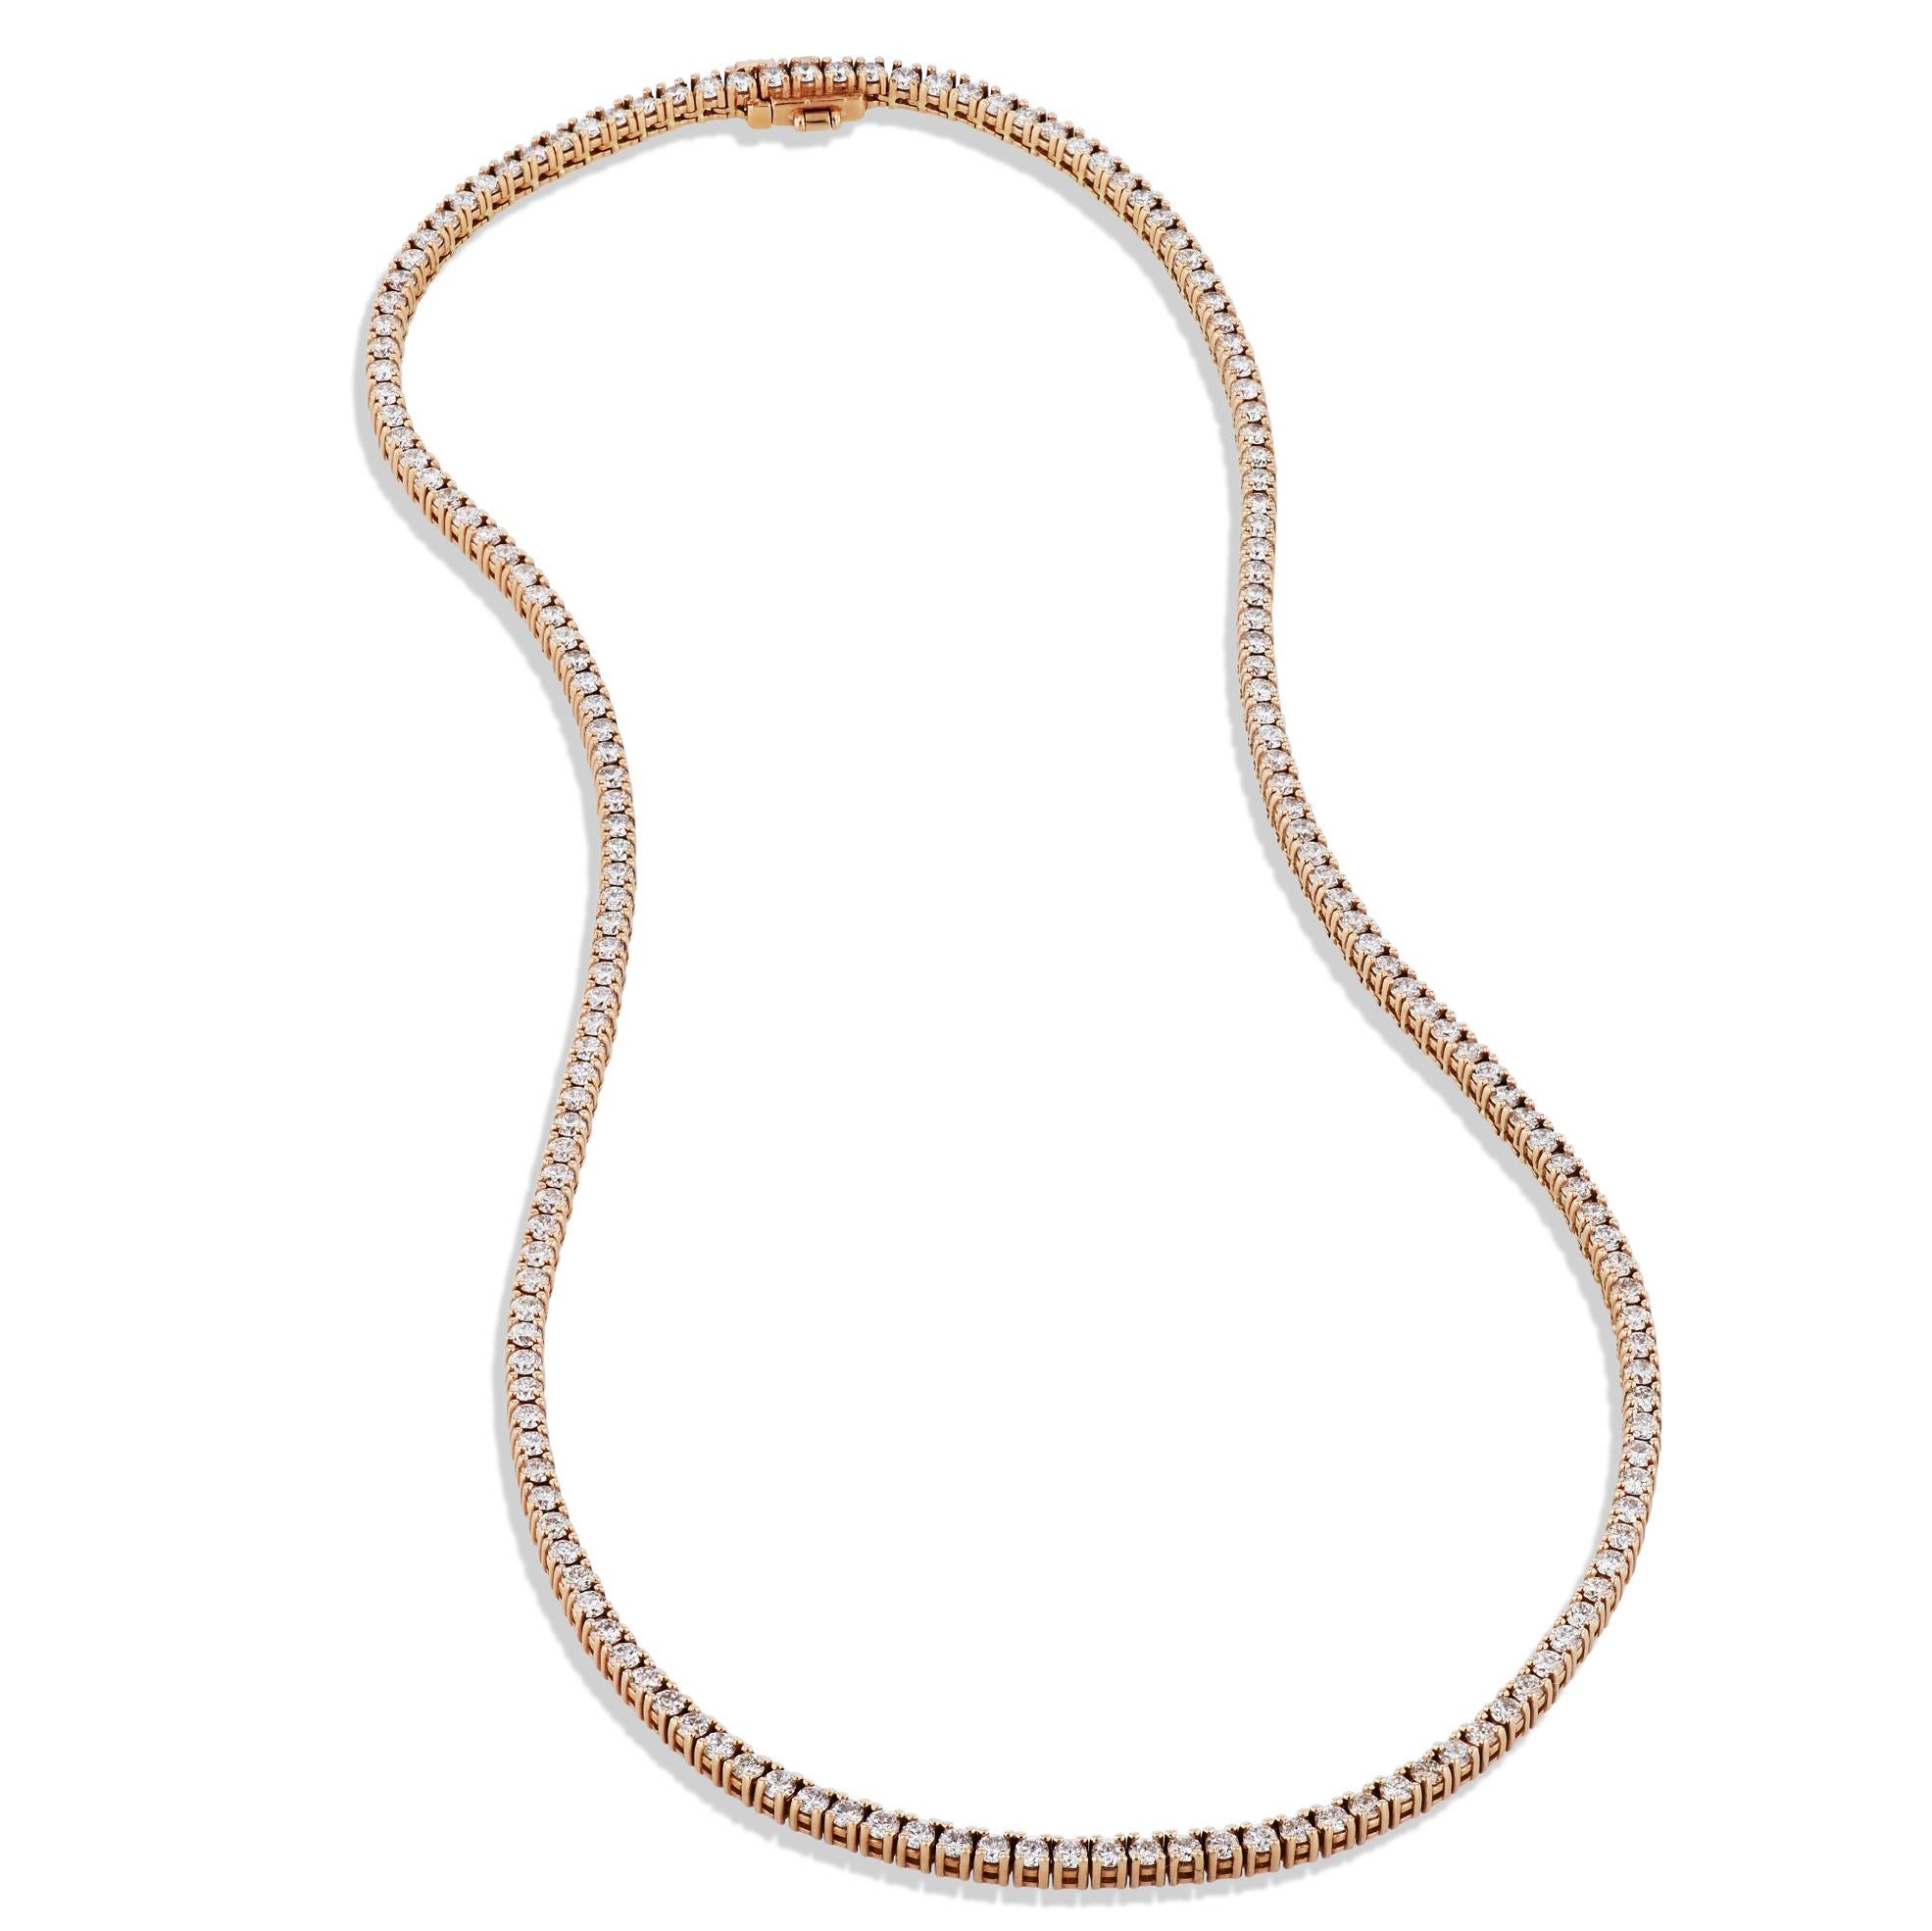 This breathtaking 18 karat Rose Gold Diamond Tennis Necklace is set with an array of 174 dazzling diamonds. Crafting a captivating aura, Diamonds drape gracefully over the 16